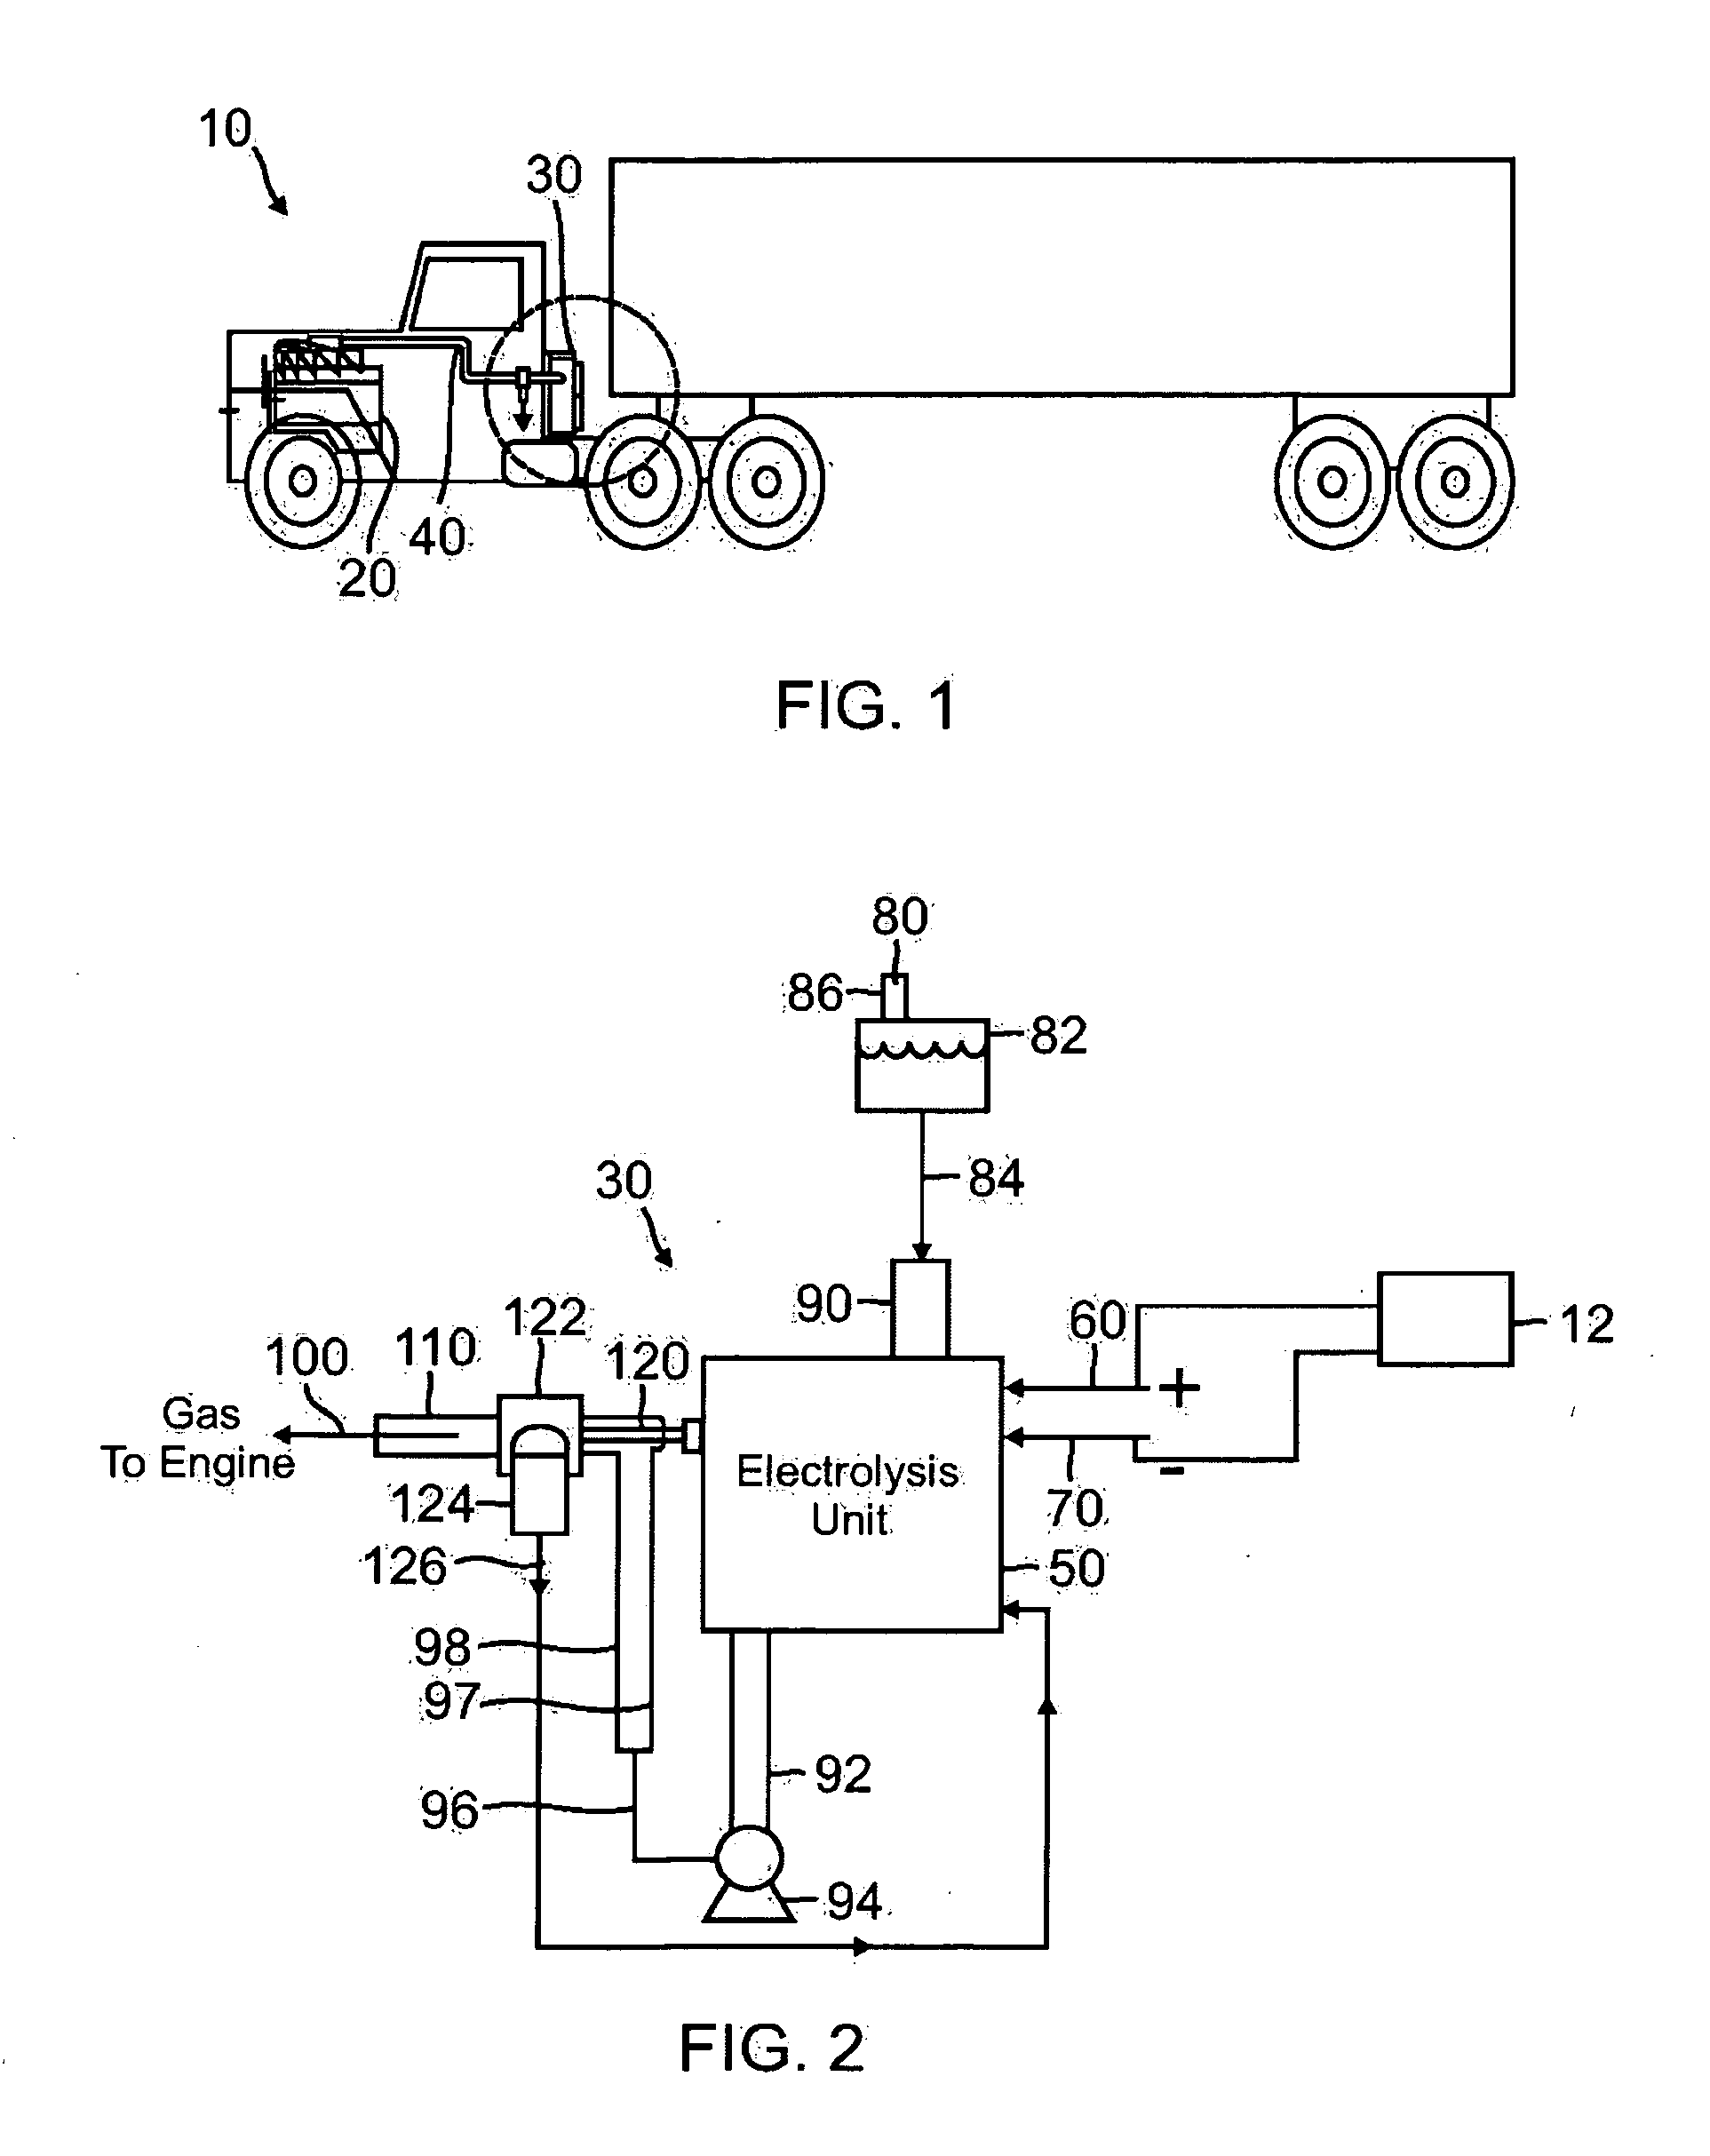 Method and apparatus for electolysis-assisted generation of hydrogen